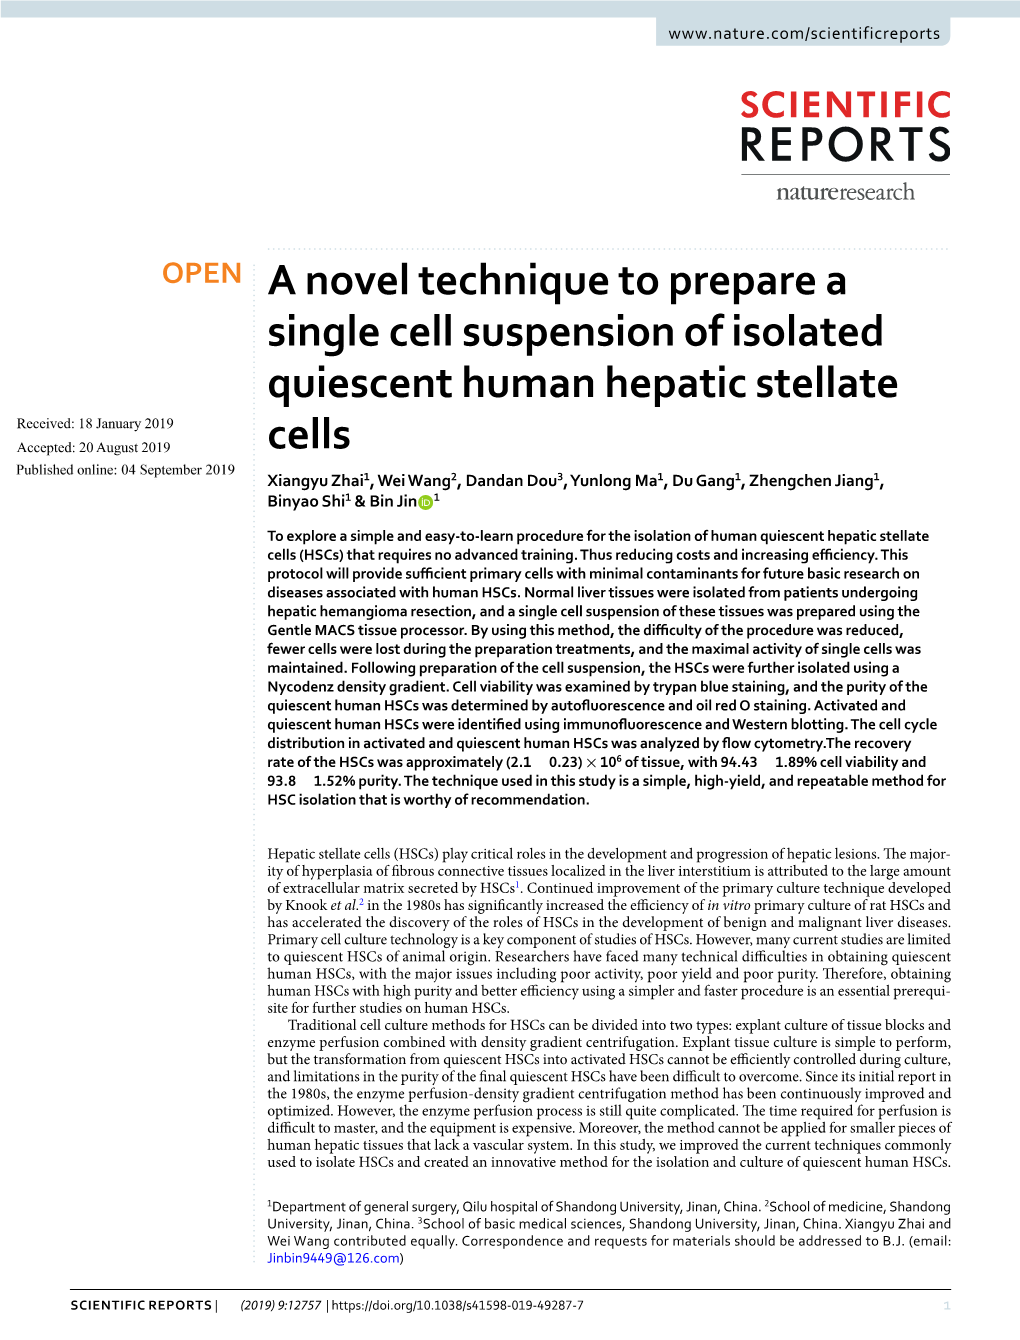 A Novel Technique to Prepare a Single Cell Suspension of Isolated Quiescent Human Hepatic Stellate Cells